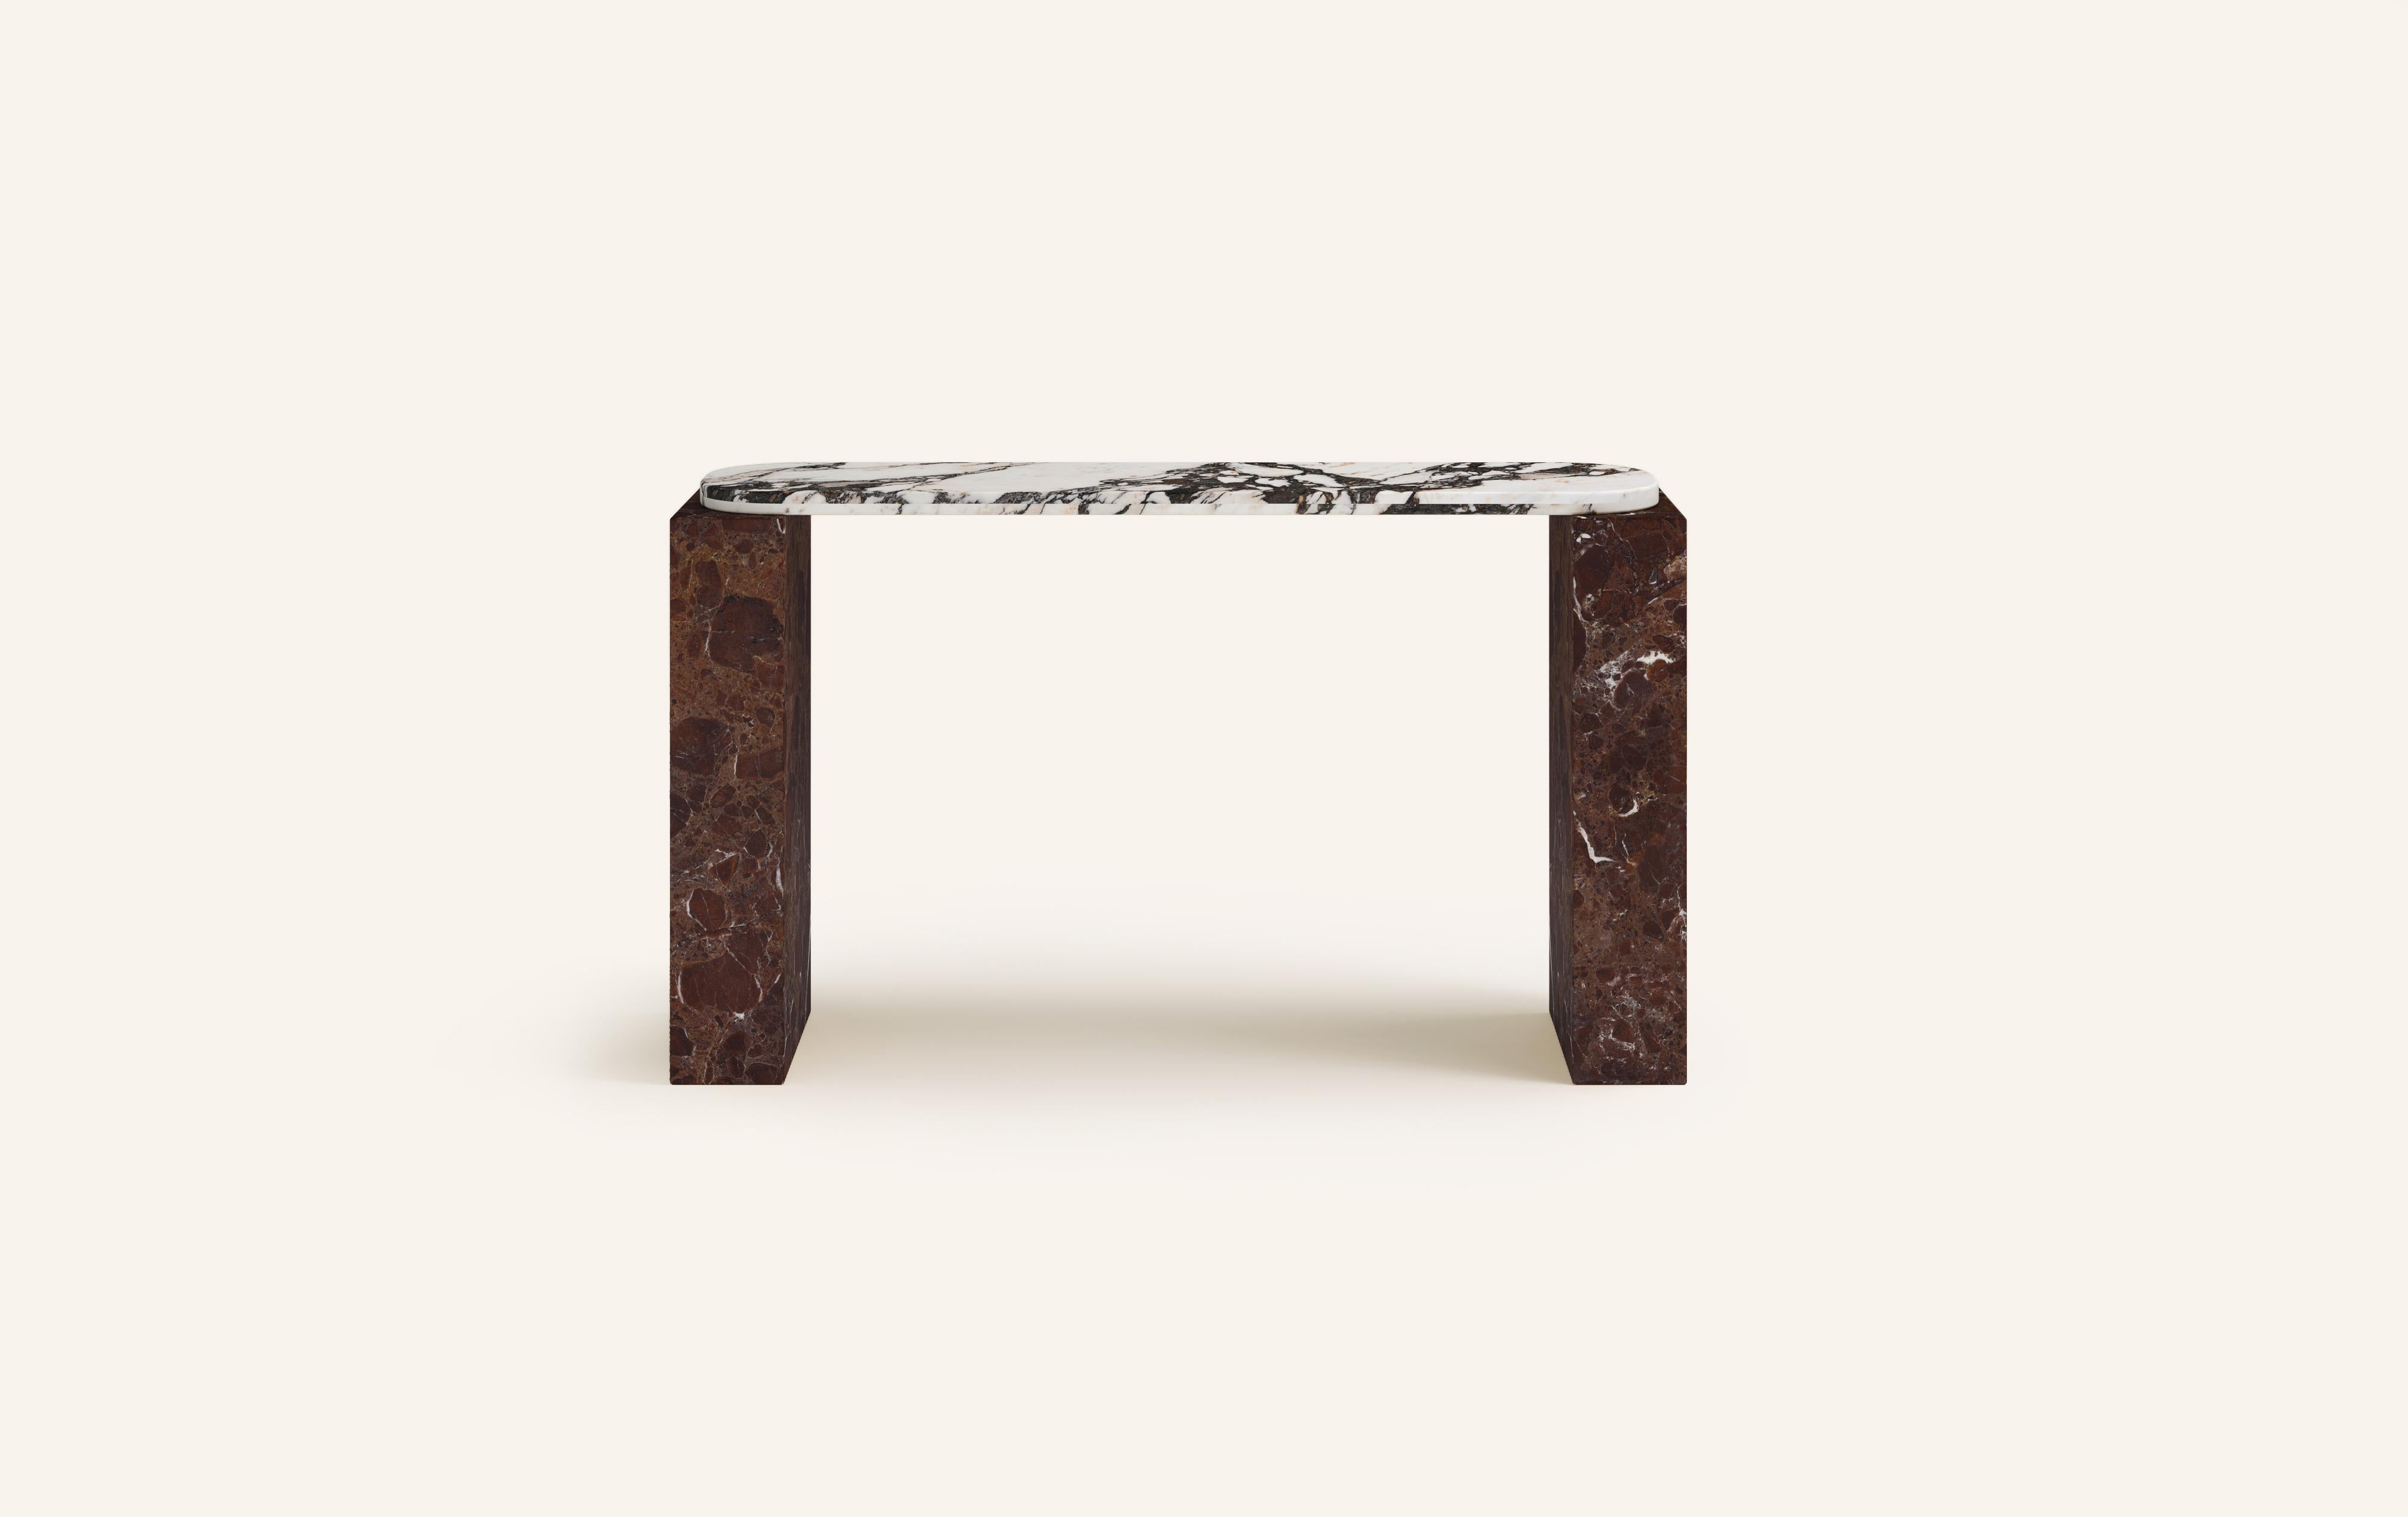 MONOLITHIC FORMS SOFTENED BY GENTLE EDGES. WITH ITS BOLD MARBLE PATTERNS CUBO IS AS VERSATILE AS IT IS STRIKING.

DIMENSIONS:
50”L x 17”W x 36”H: 
- 48”L x 15”W x 1.5” THICK TABLETOP WITH WITH 6